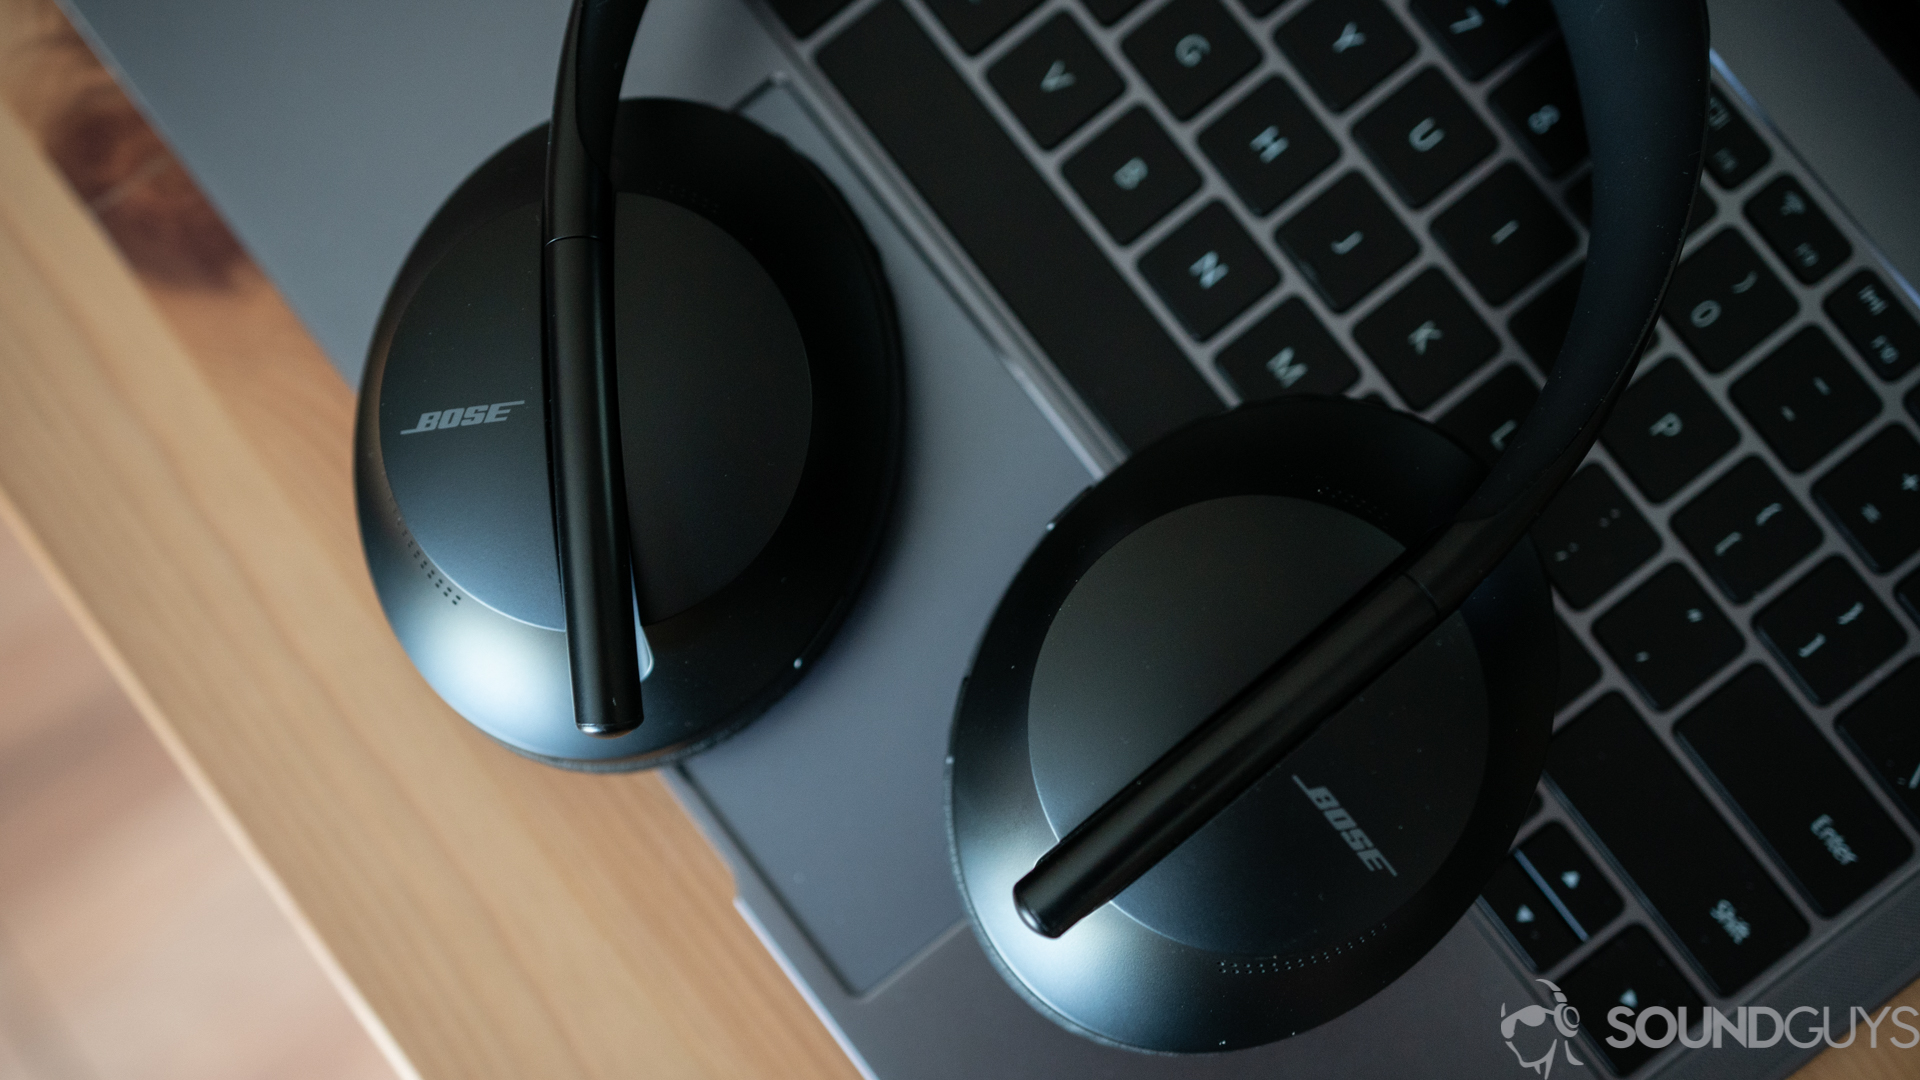 Pictured are the Bose Noise Canceling Headphones 700 on top of the keyboard of a Huawei Matebook 